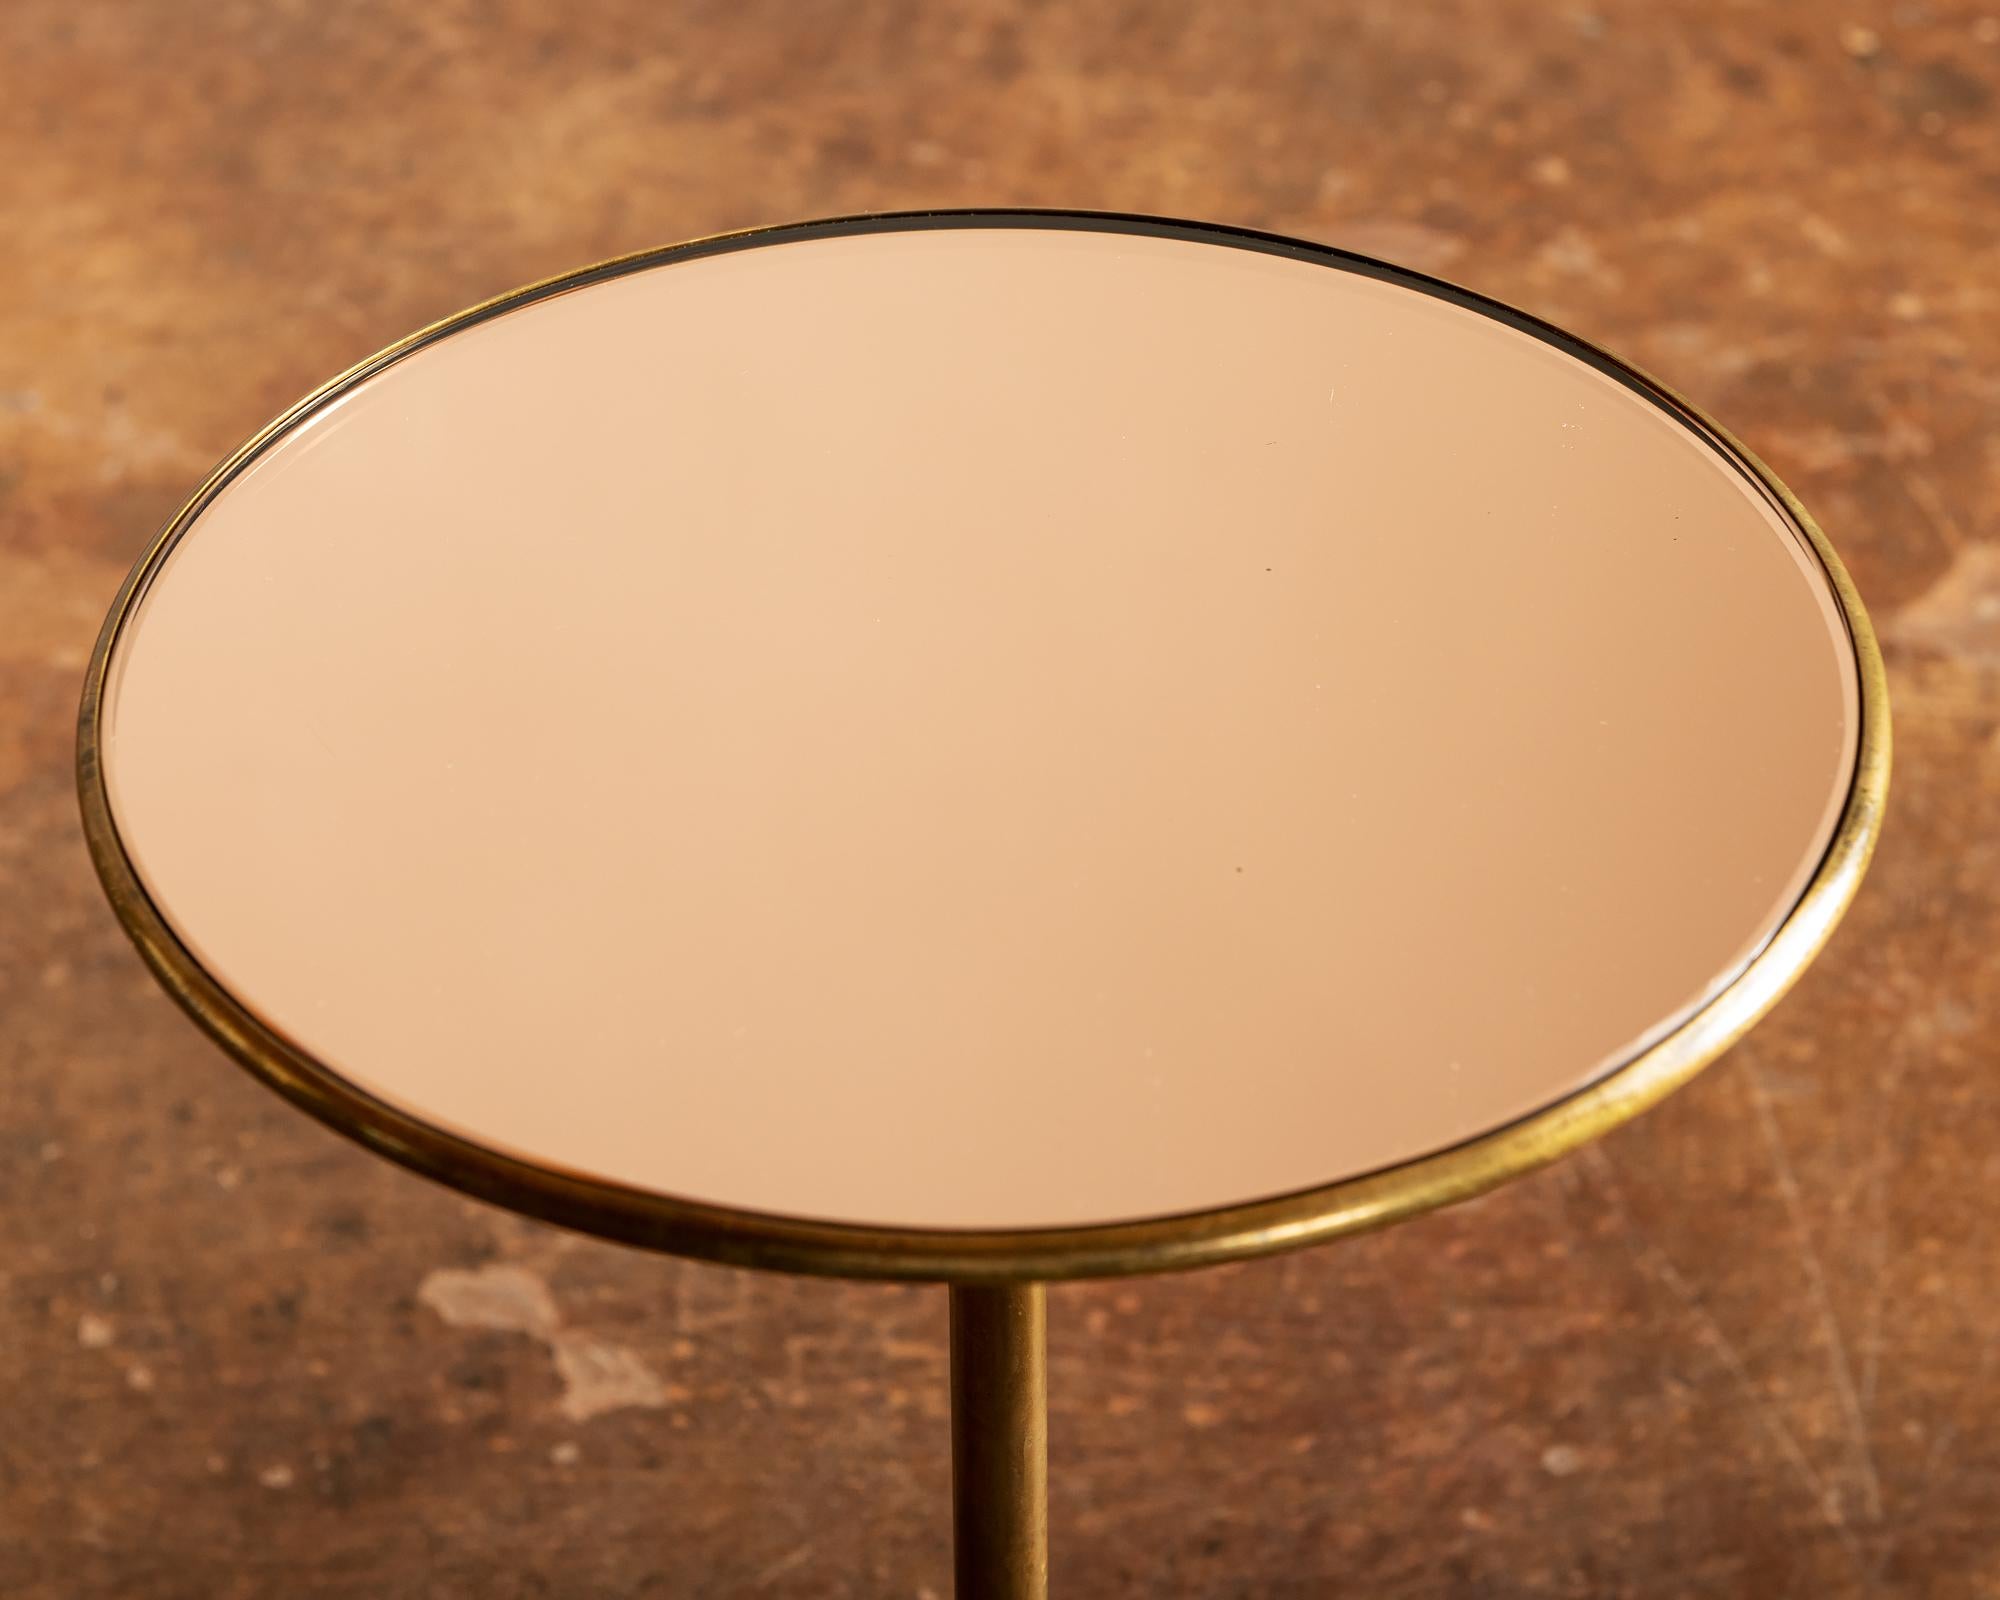 Italian Rare Pair of Side Tables by Osvaldo Borsani in Brass and Rose-Tinted Glass 1940s